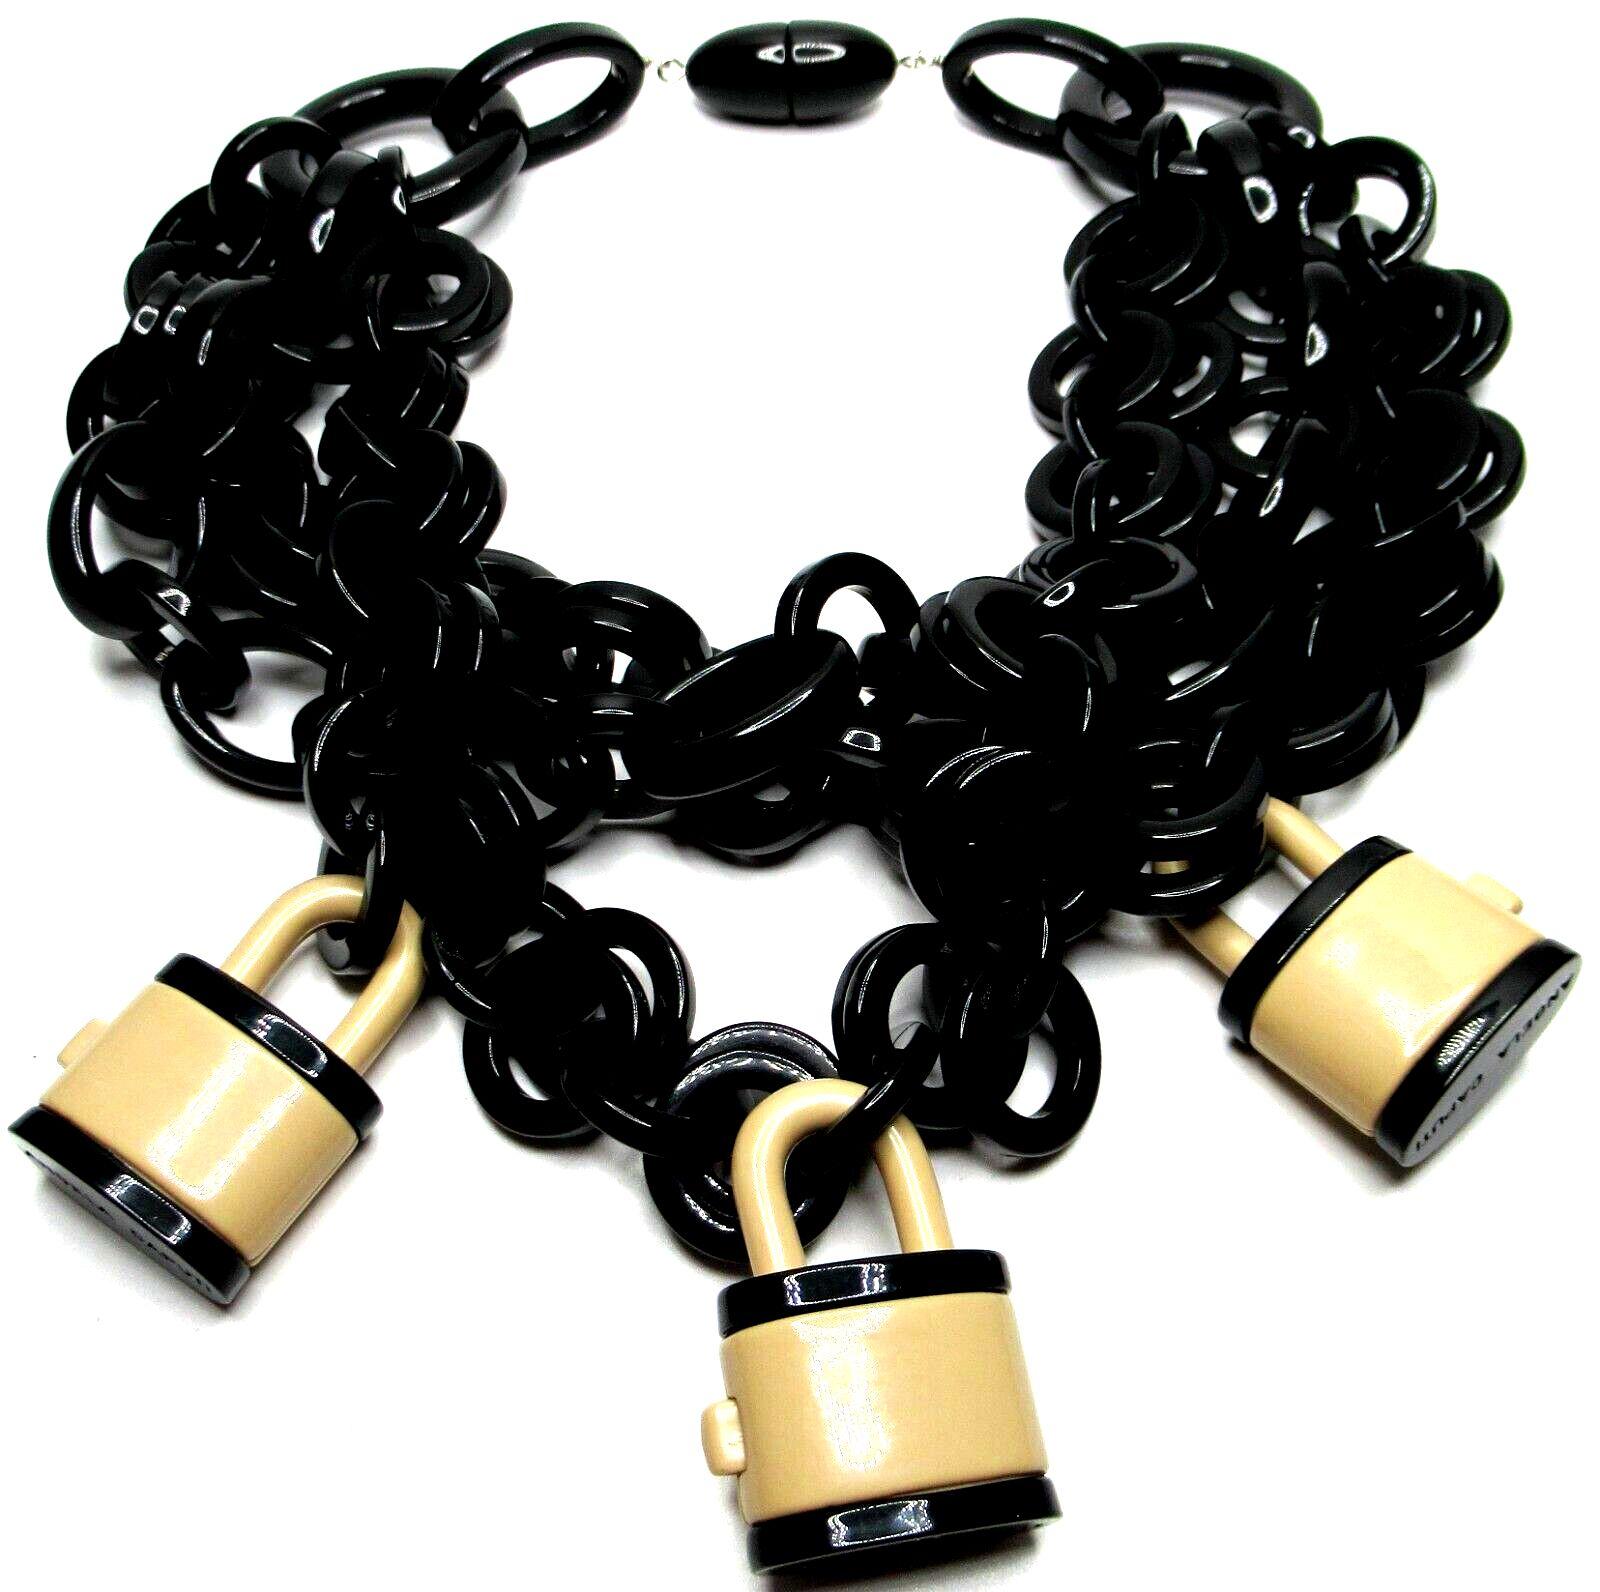 Simply Beautiful! Vintage ANGELA CAPUTI Designer Signed Black and Tan Working Padlock Runway Statement Necklace Italy. Featuring round, black Resin Cable Links suspending three two-tone resin Padlocks, completed by a Barrel-shaped snap clasp,